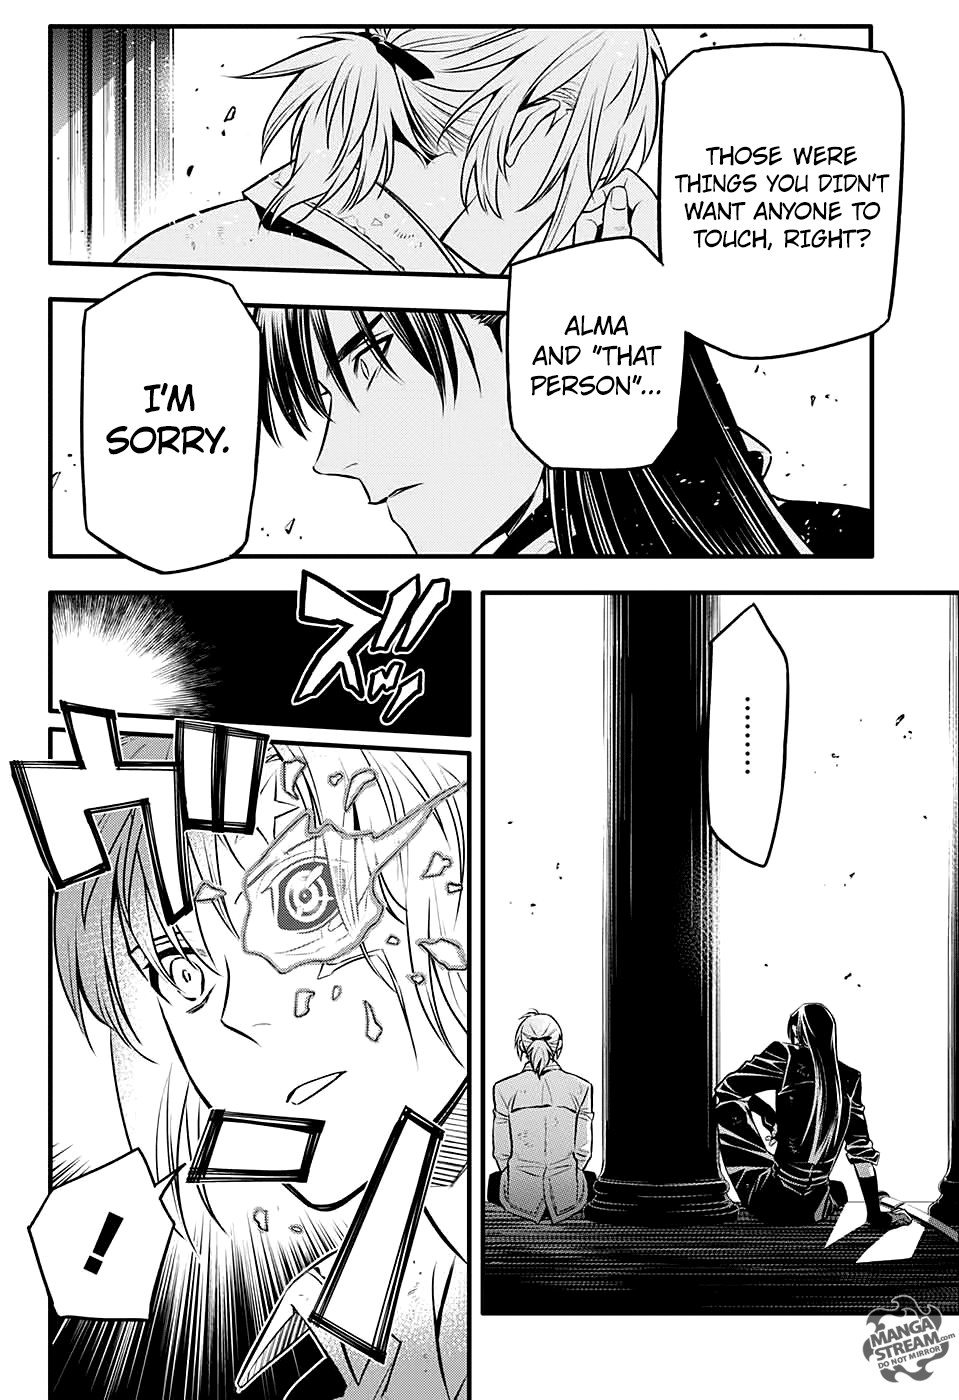 D.Gray-man chapter 231 page 18